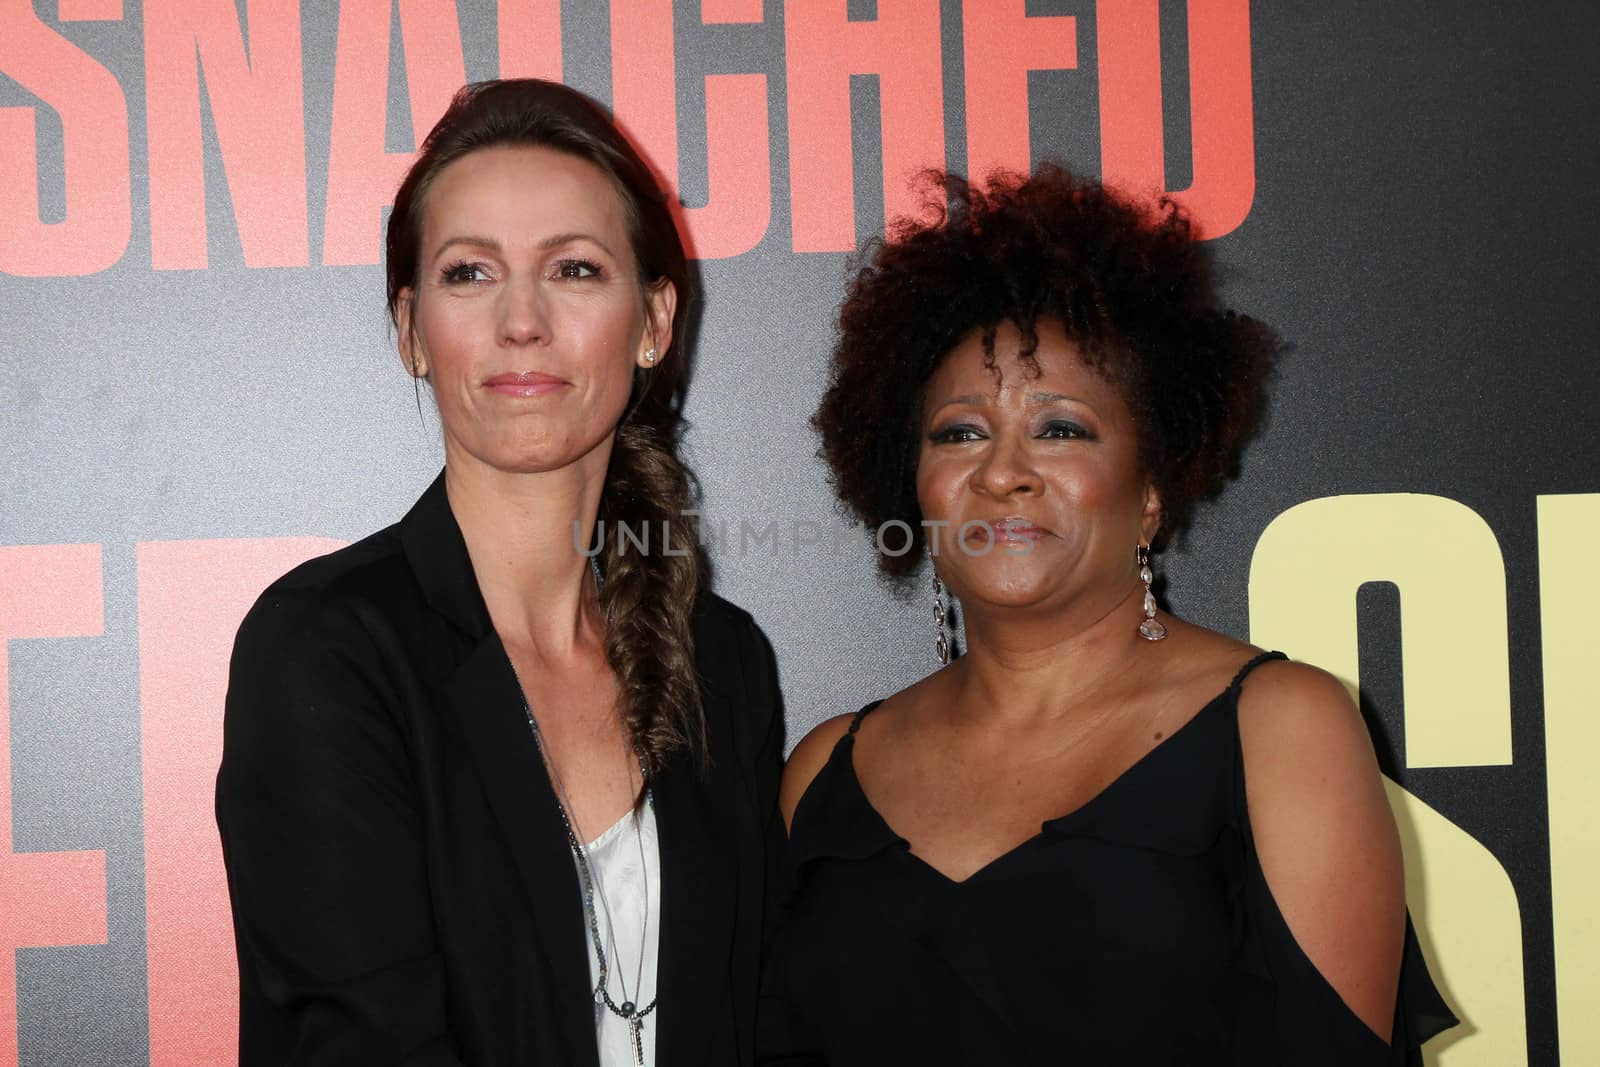 Wanda Sykes, Alex Sykes at the "Snatched" World Premiere, Village Theater, Westwood, CA 05-10-17/ImageCollect by ImageCollect